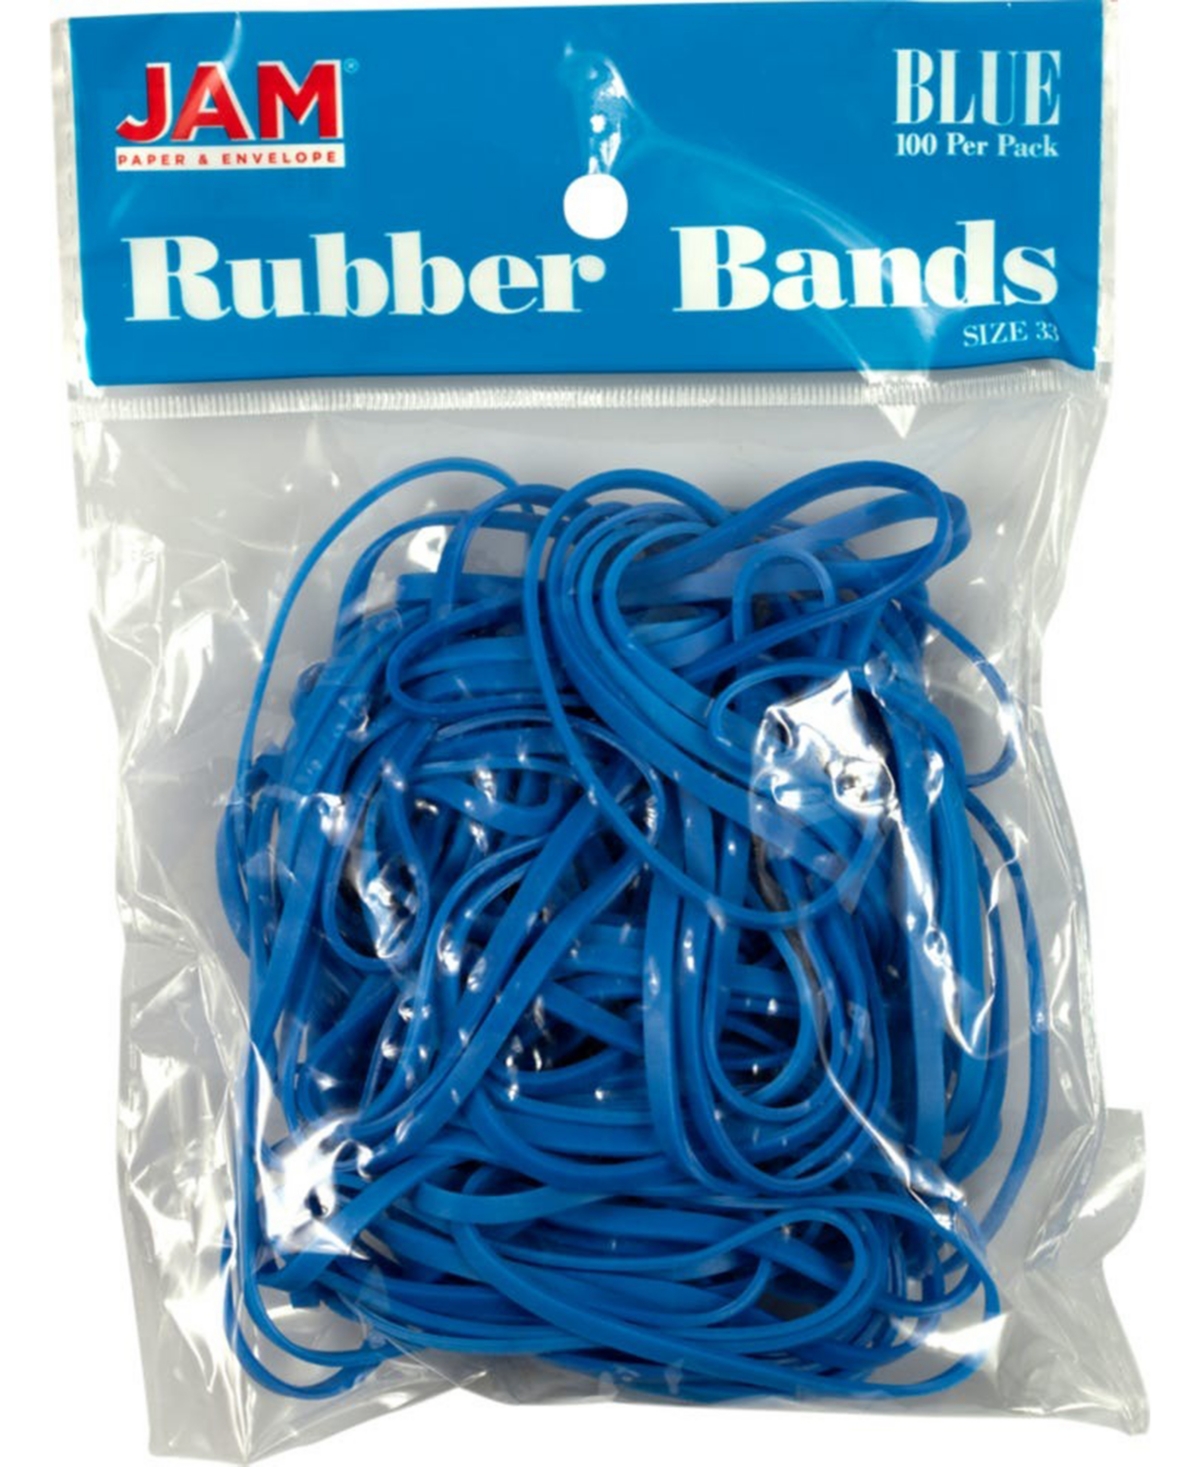 Colorful Rubber Bands - Size 33 - 100 Per Pack - Blue